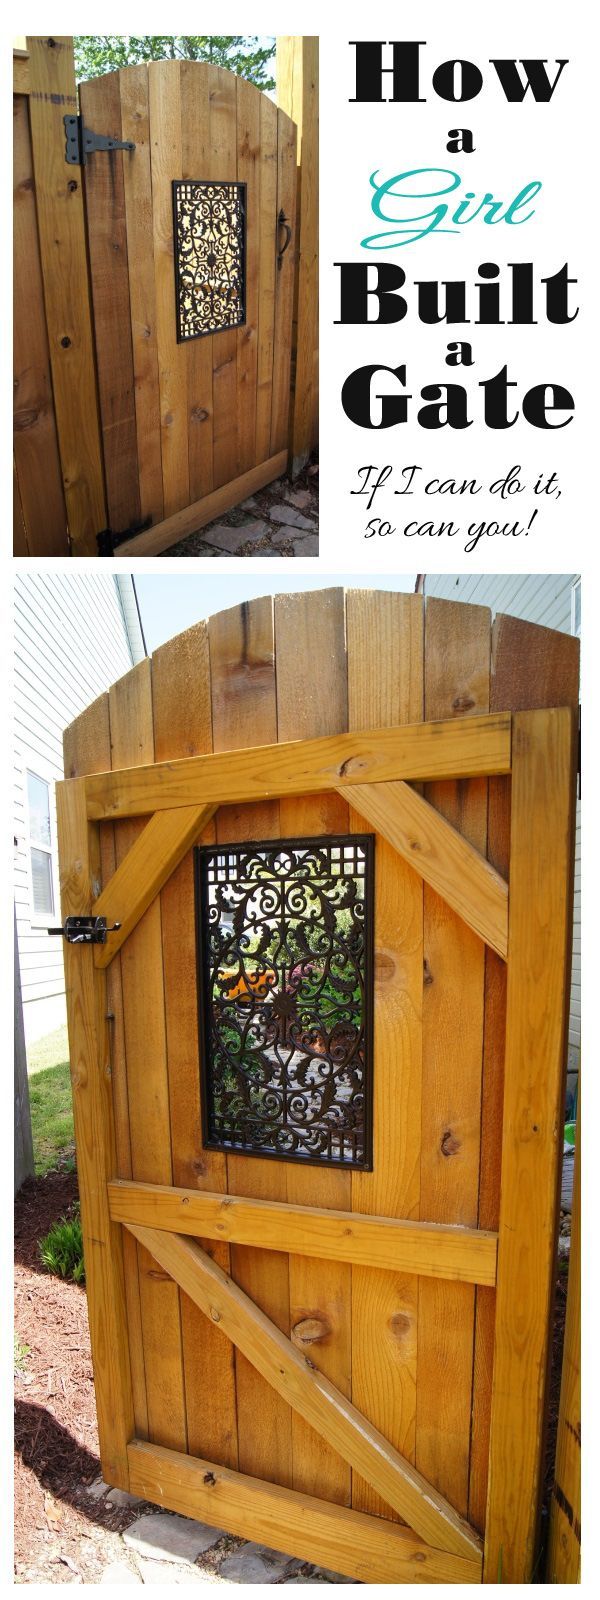 How to build a gate with a decorative window by Confessions of a Serial Do-it-Yourselfer